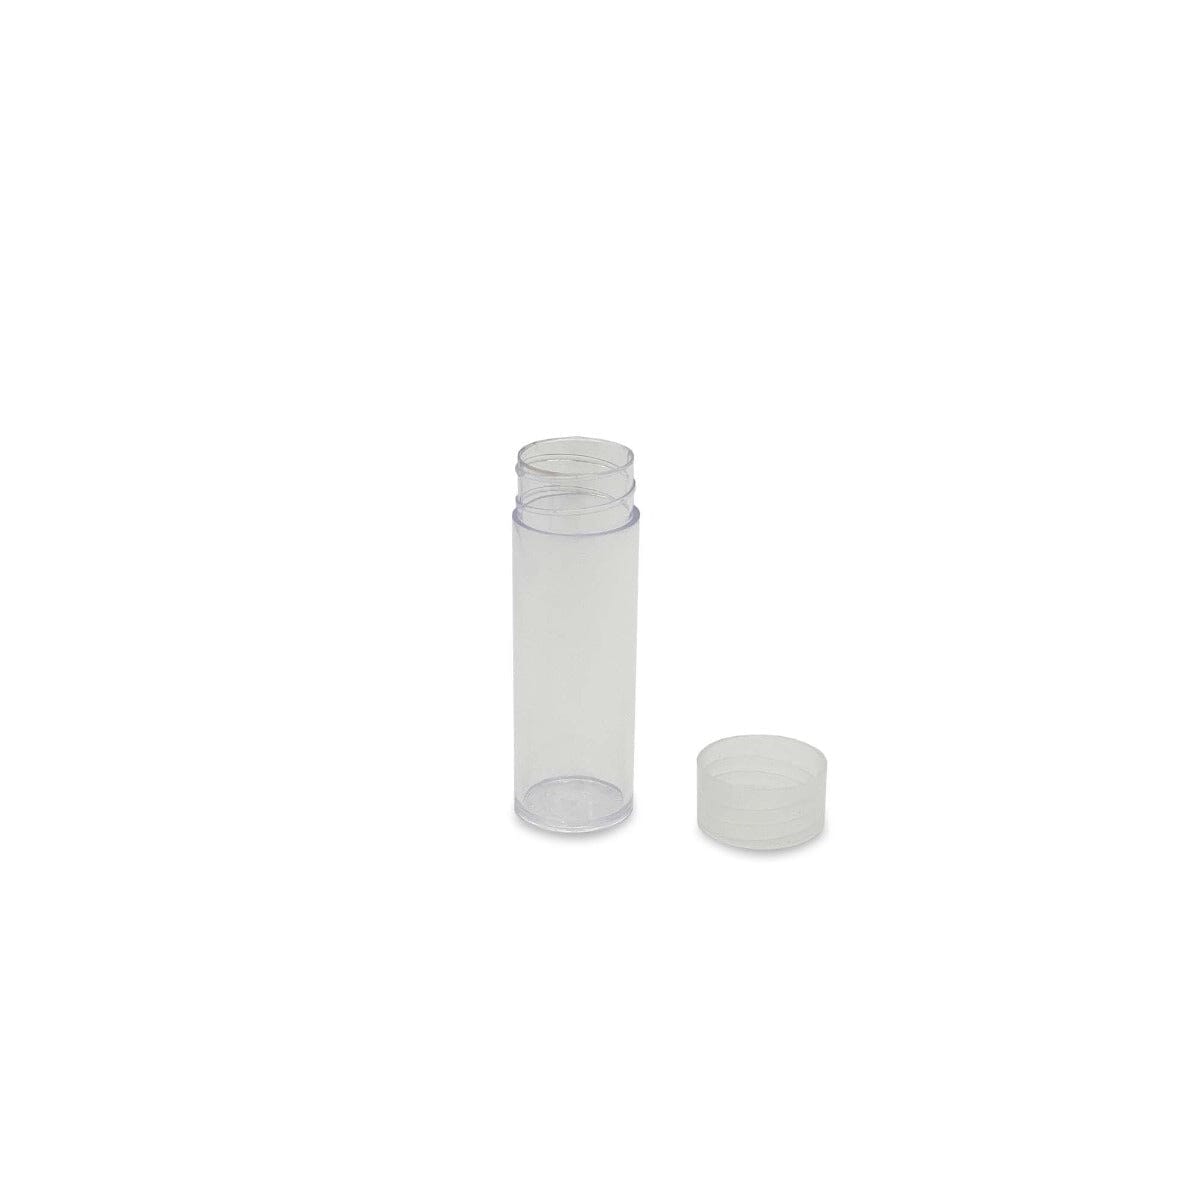 Plastic Coin Tubes - 7 Sizes Available